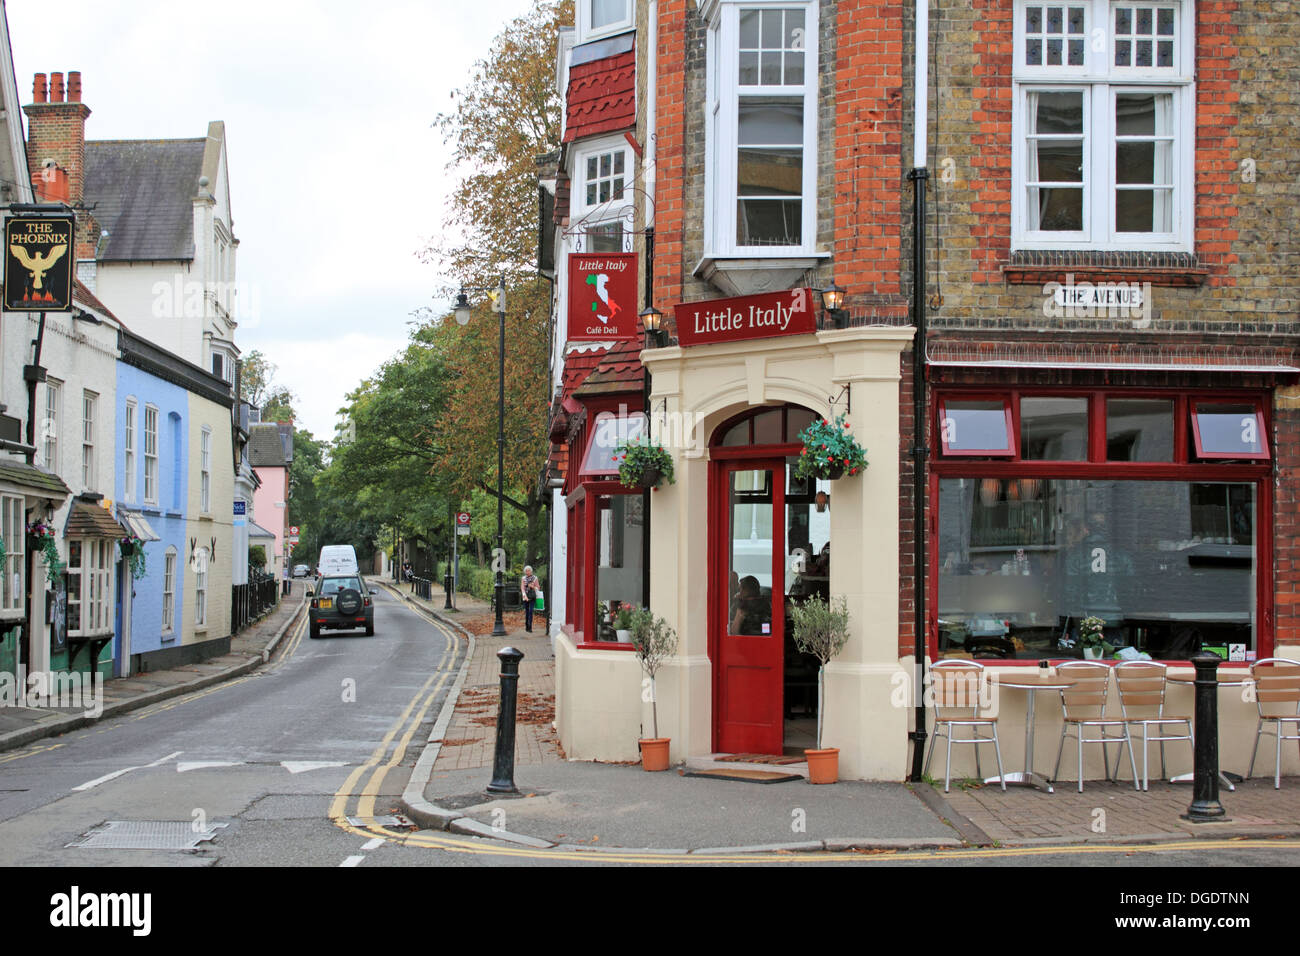 Little Italy cafe on the corner of The Avenue and Thames Street, Sunbury on Thames, Surrey, England, UK. Stock Photo